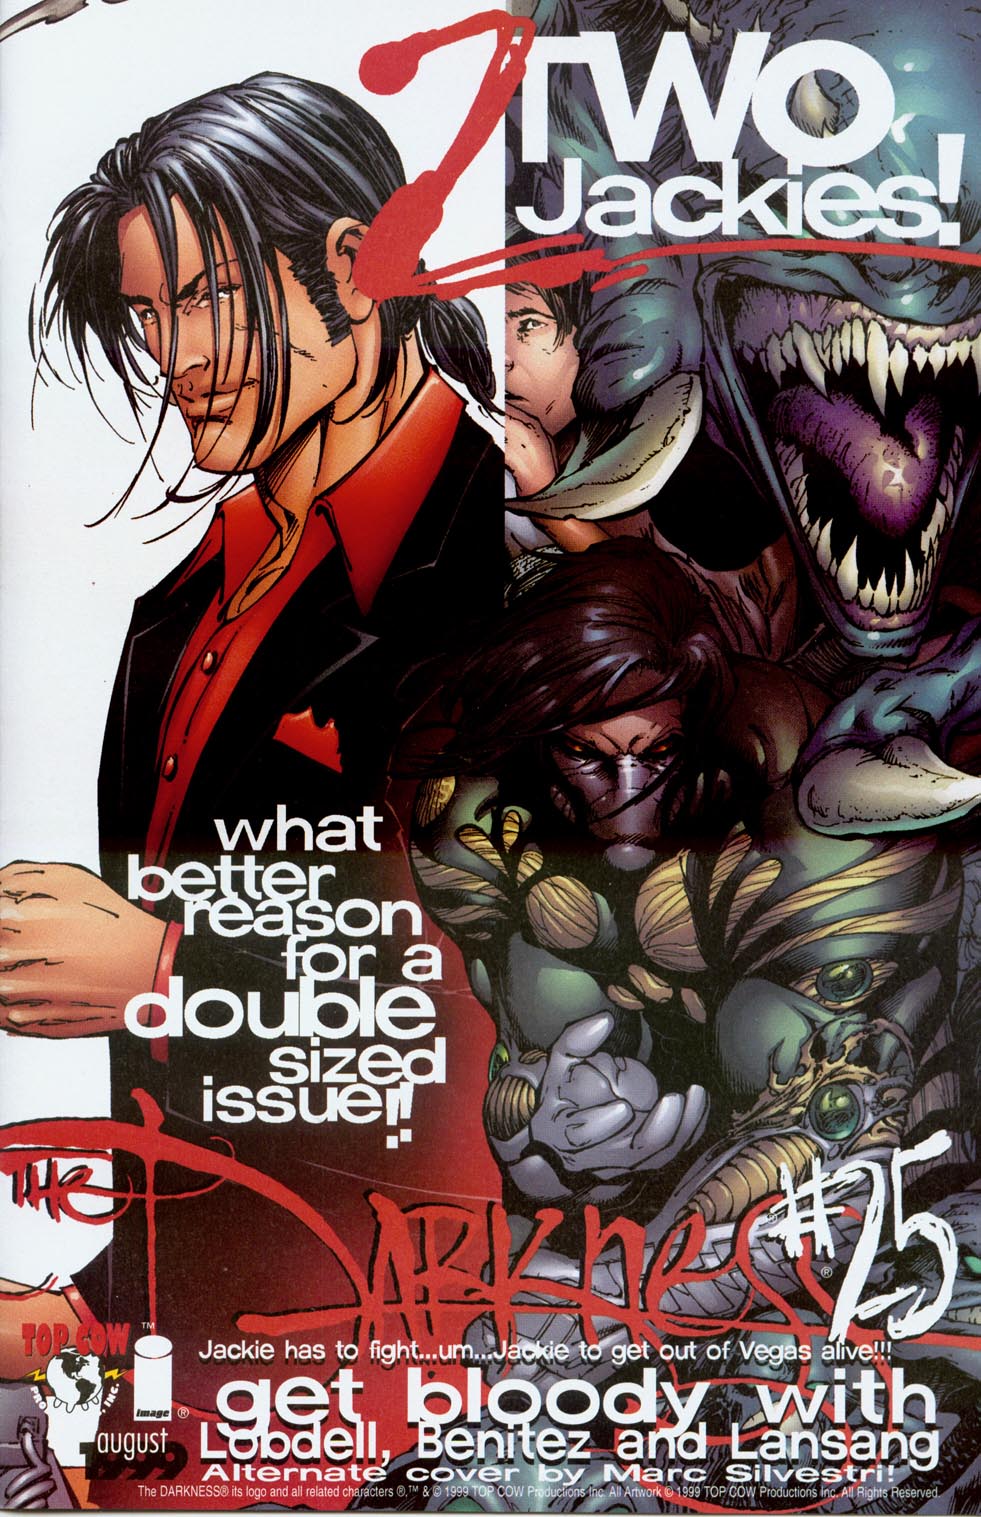 fictional character - Wo Jackies Pson double Jackie has to fight...um.Jackie to get out of Vegas alive!!! get bloody v zith august Lobdell, Benitez and Lansang Image Alternate cover by Marc Silvestri! The Darkness its logo and all related characters 0.Tm 